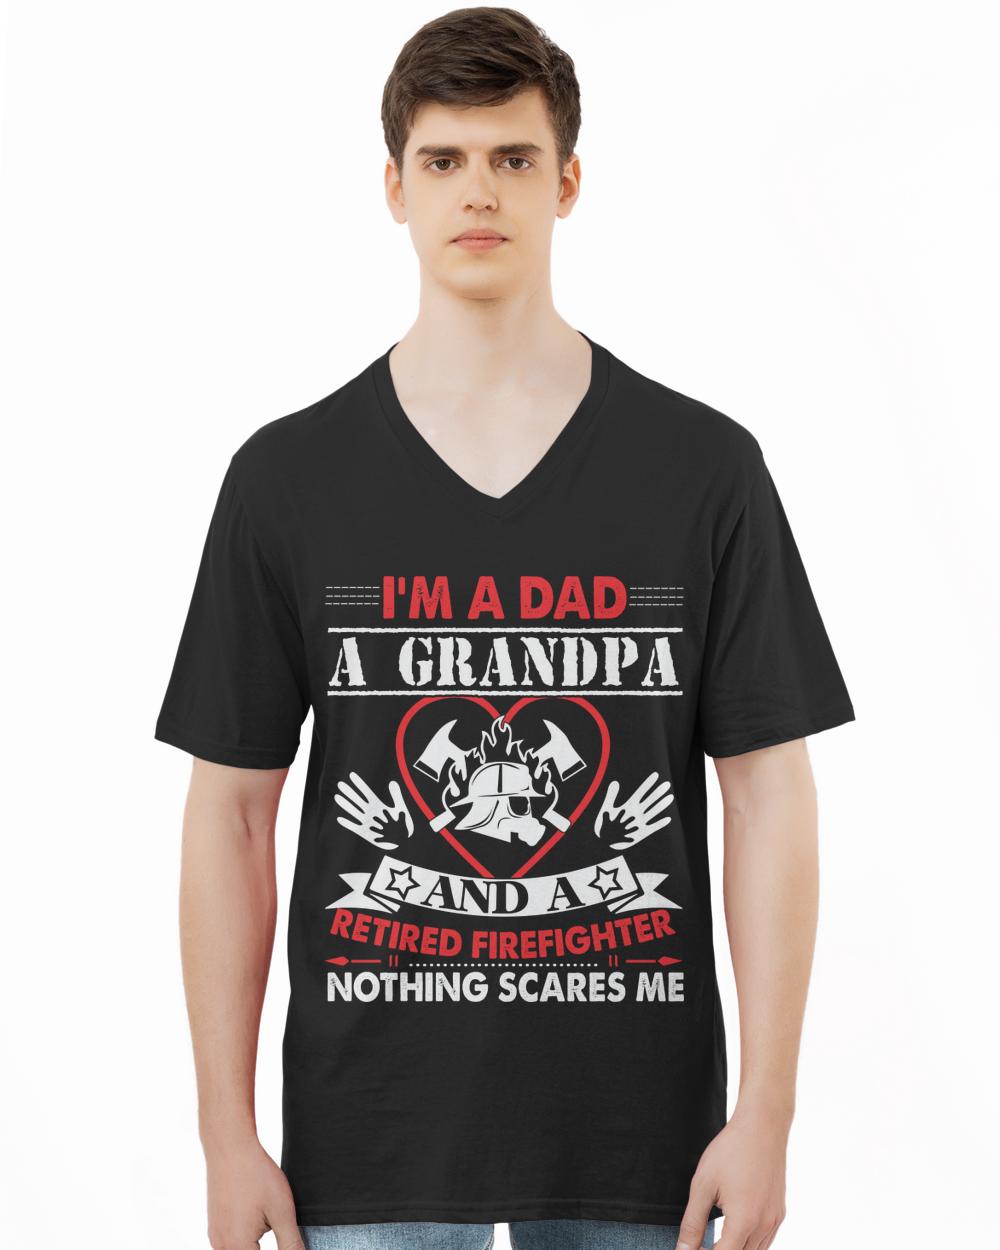 im a dad a grandpa and a retired firefighter gift t-shirt